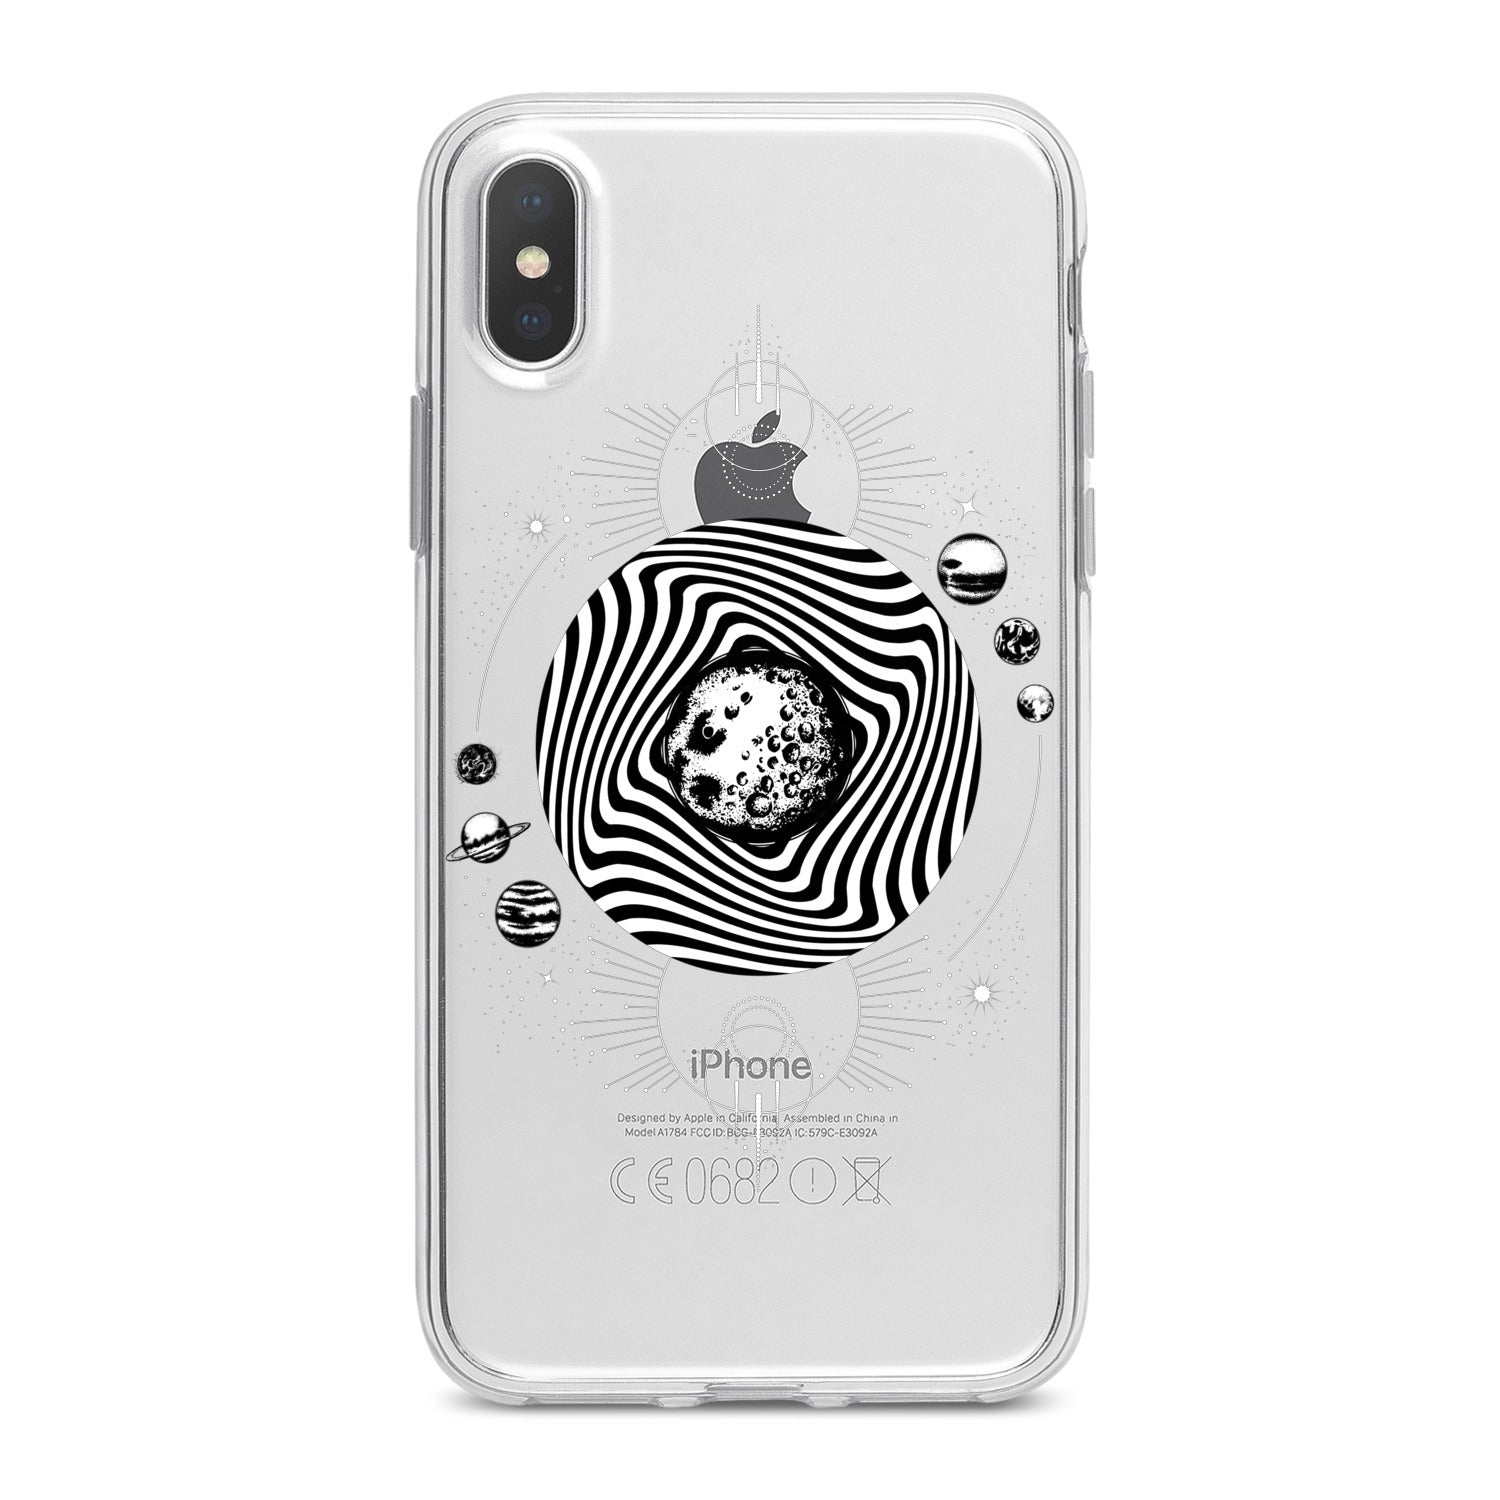 Lex Altern Solar System Art Phone Case for your iPhone & Android phone.